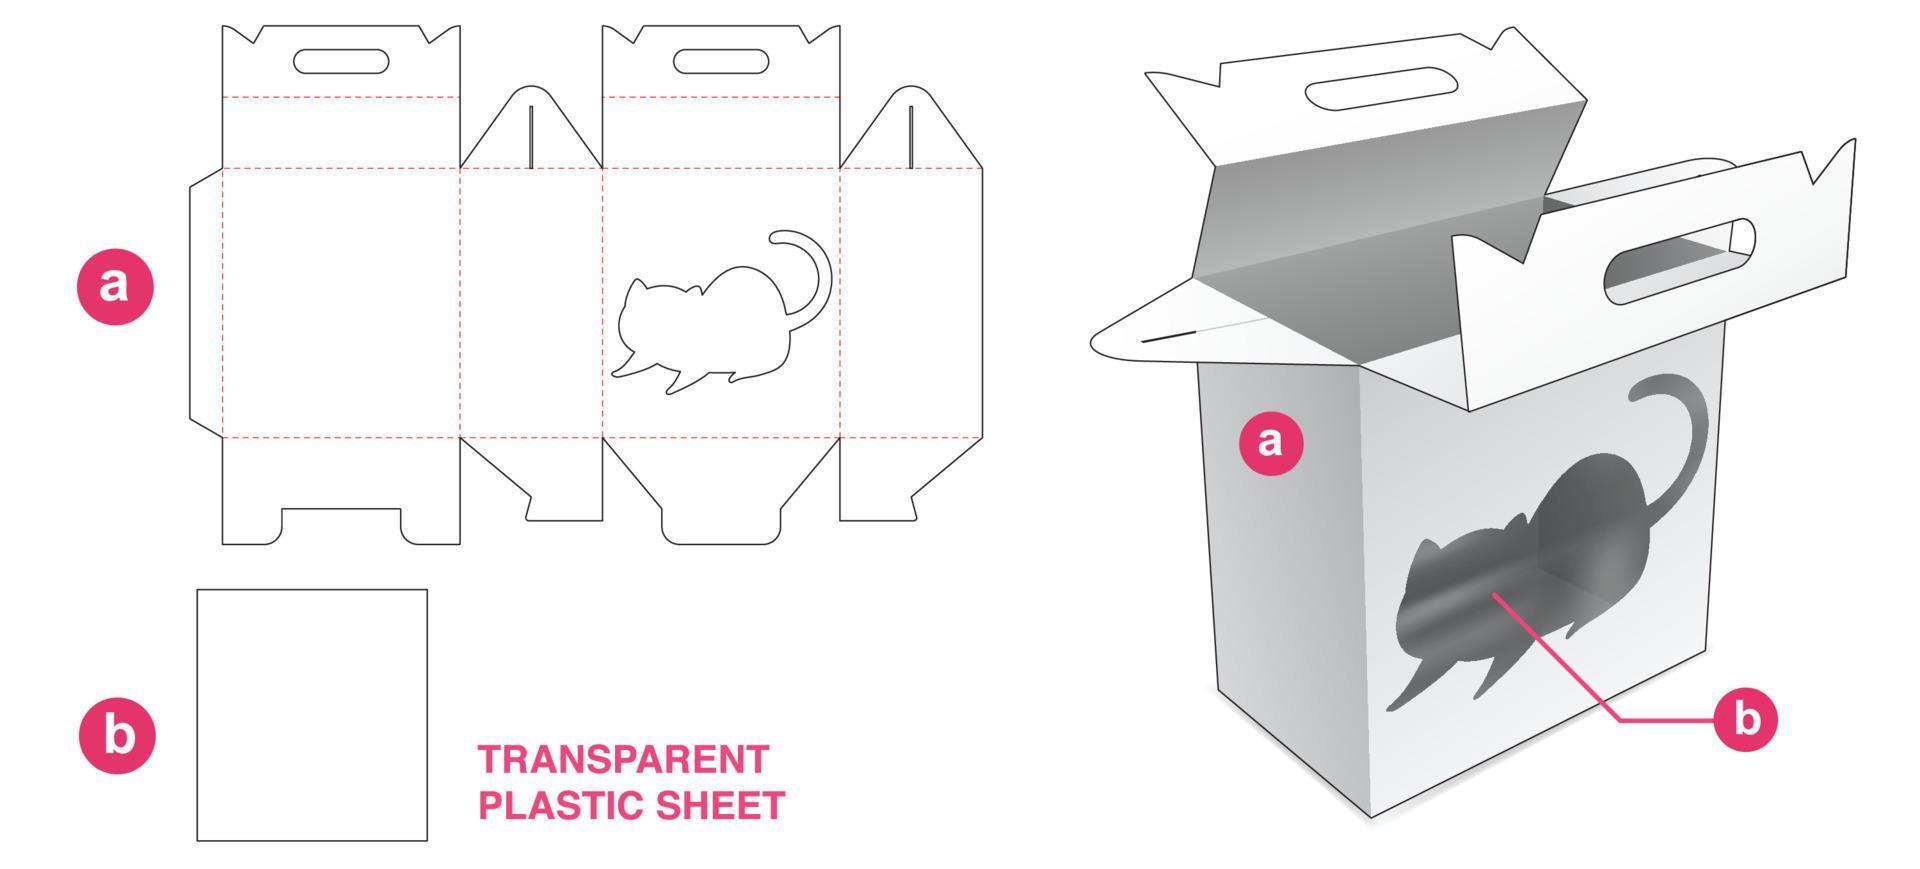 Cardboard handle box with cat window and plastic sheet die cut template vector